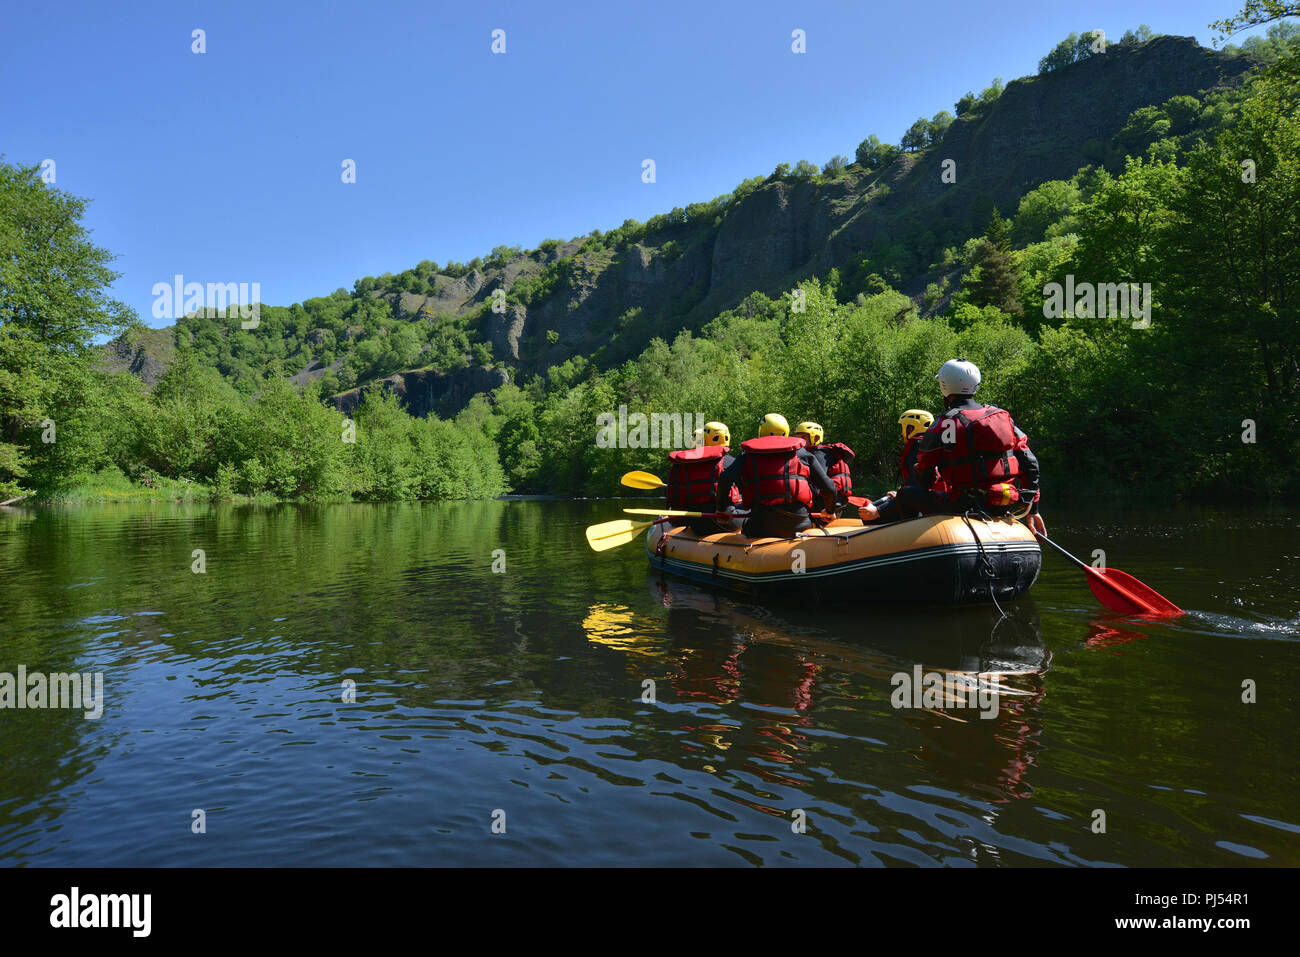 Rafting in the gorges of the Allier river from Monistrol-dÕAllier. Raft on the river, dead calm Stock Photo